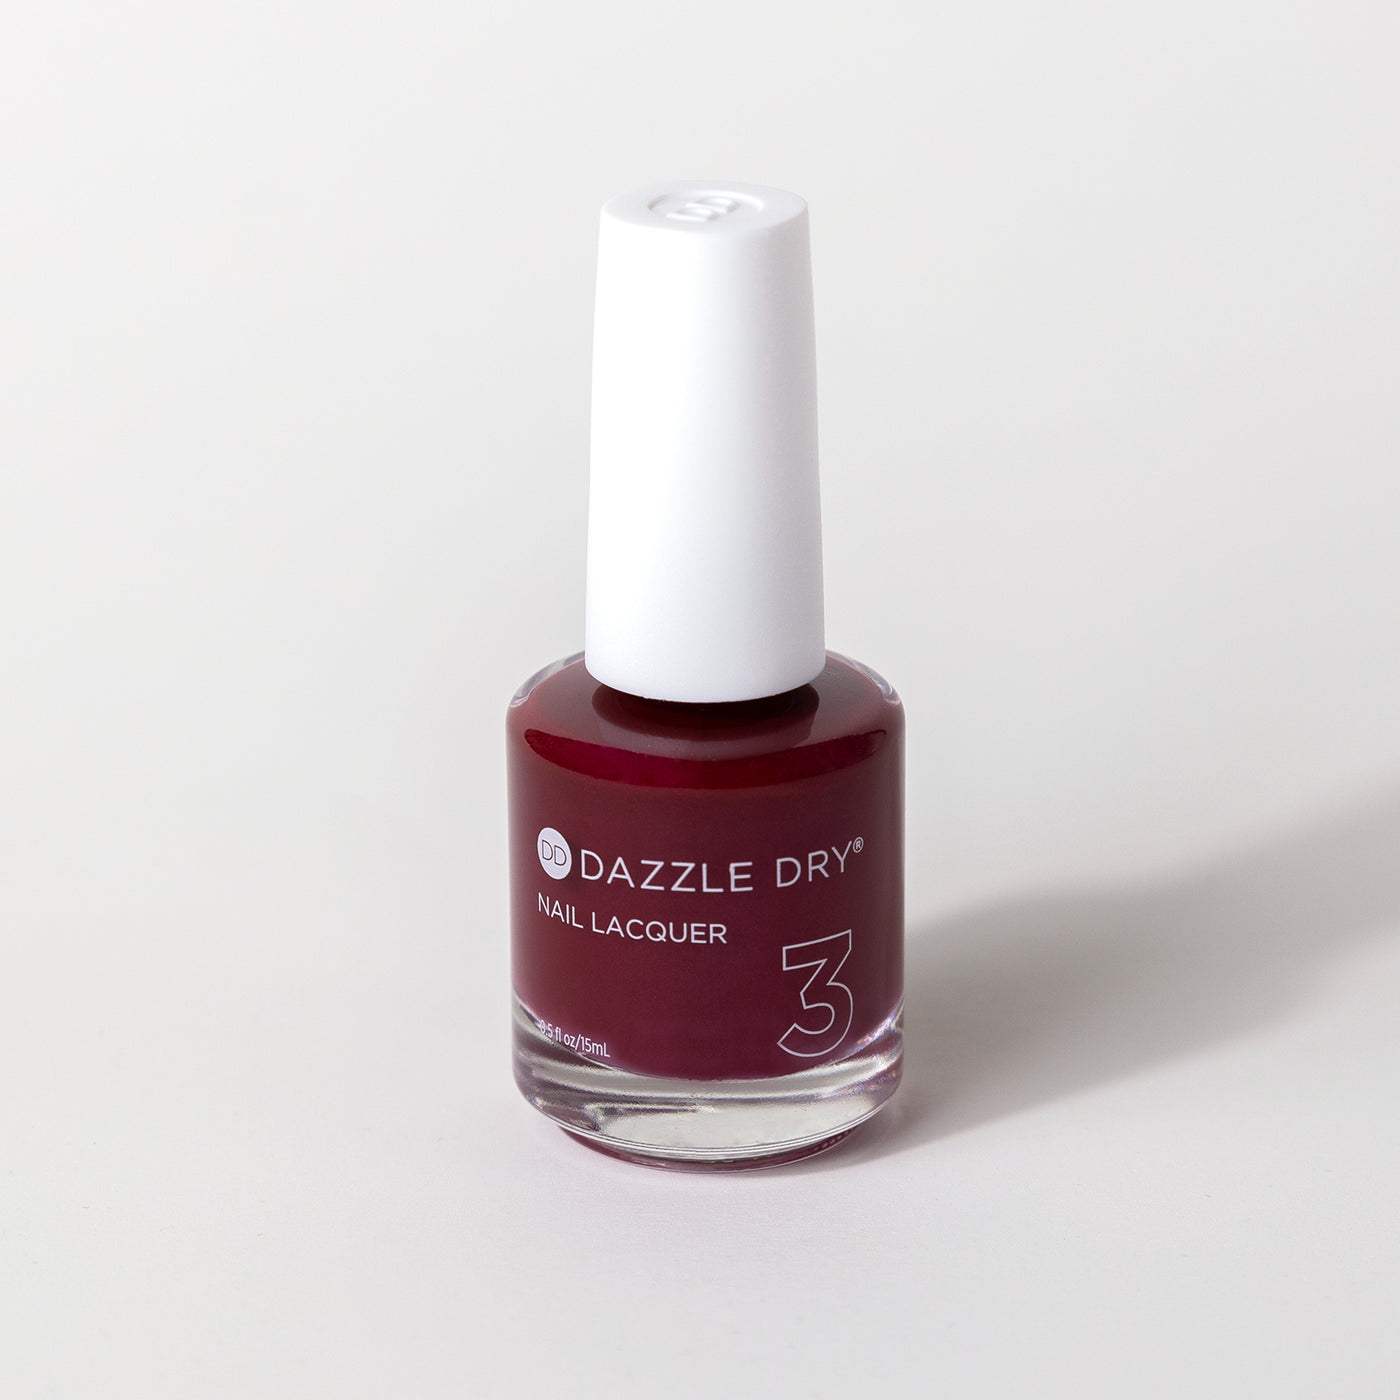 Forever Love - Dazzle Dry nail lacquer